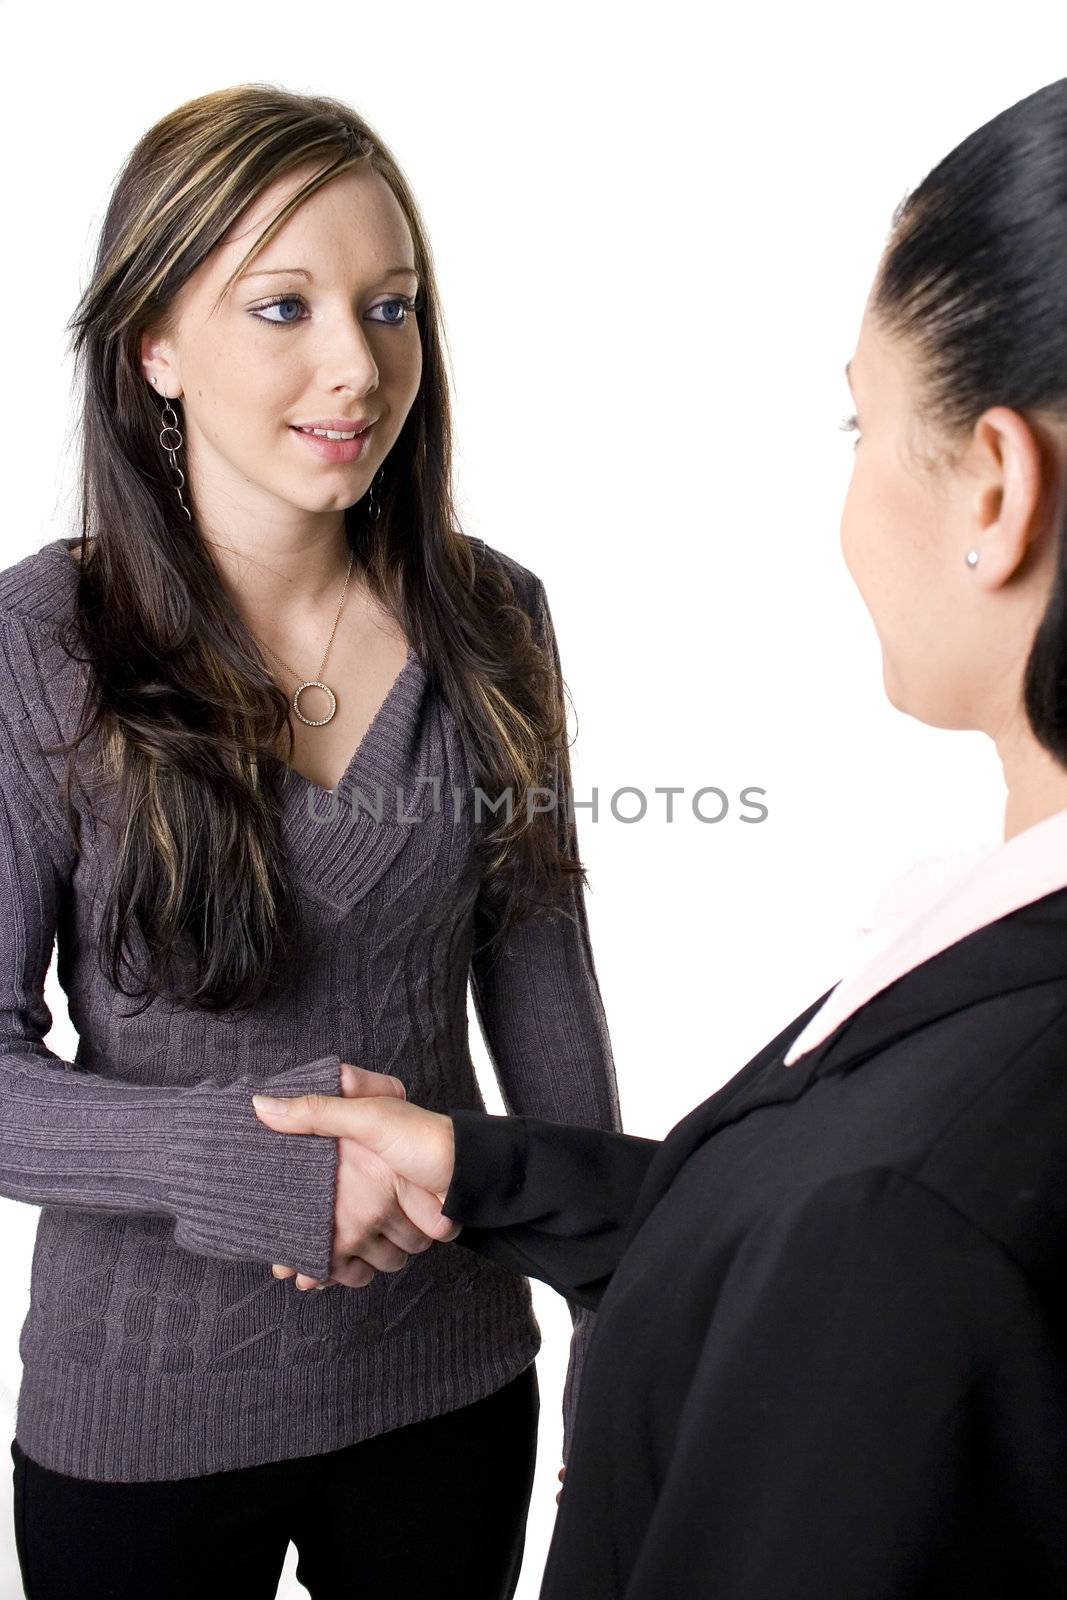 Young woman in interview shaking hands